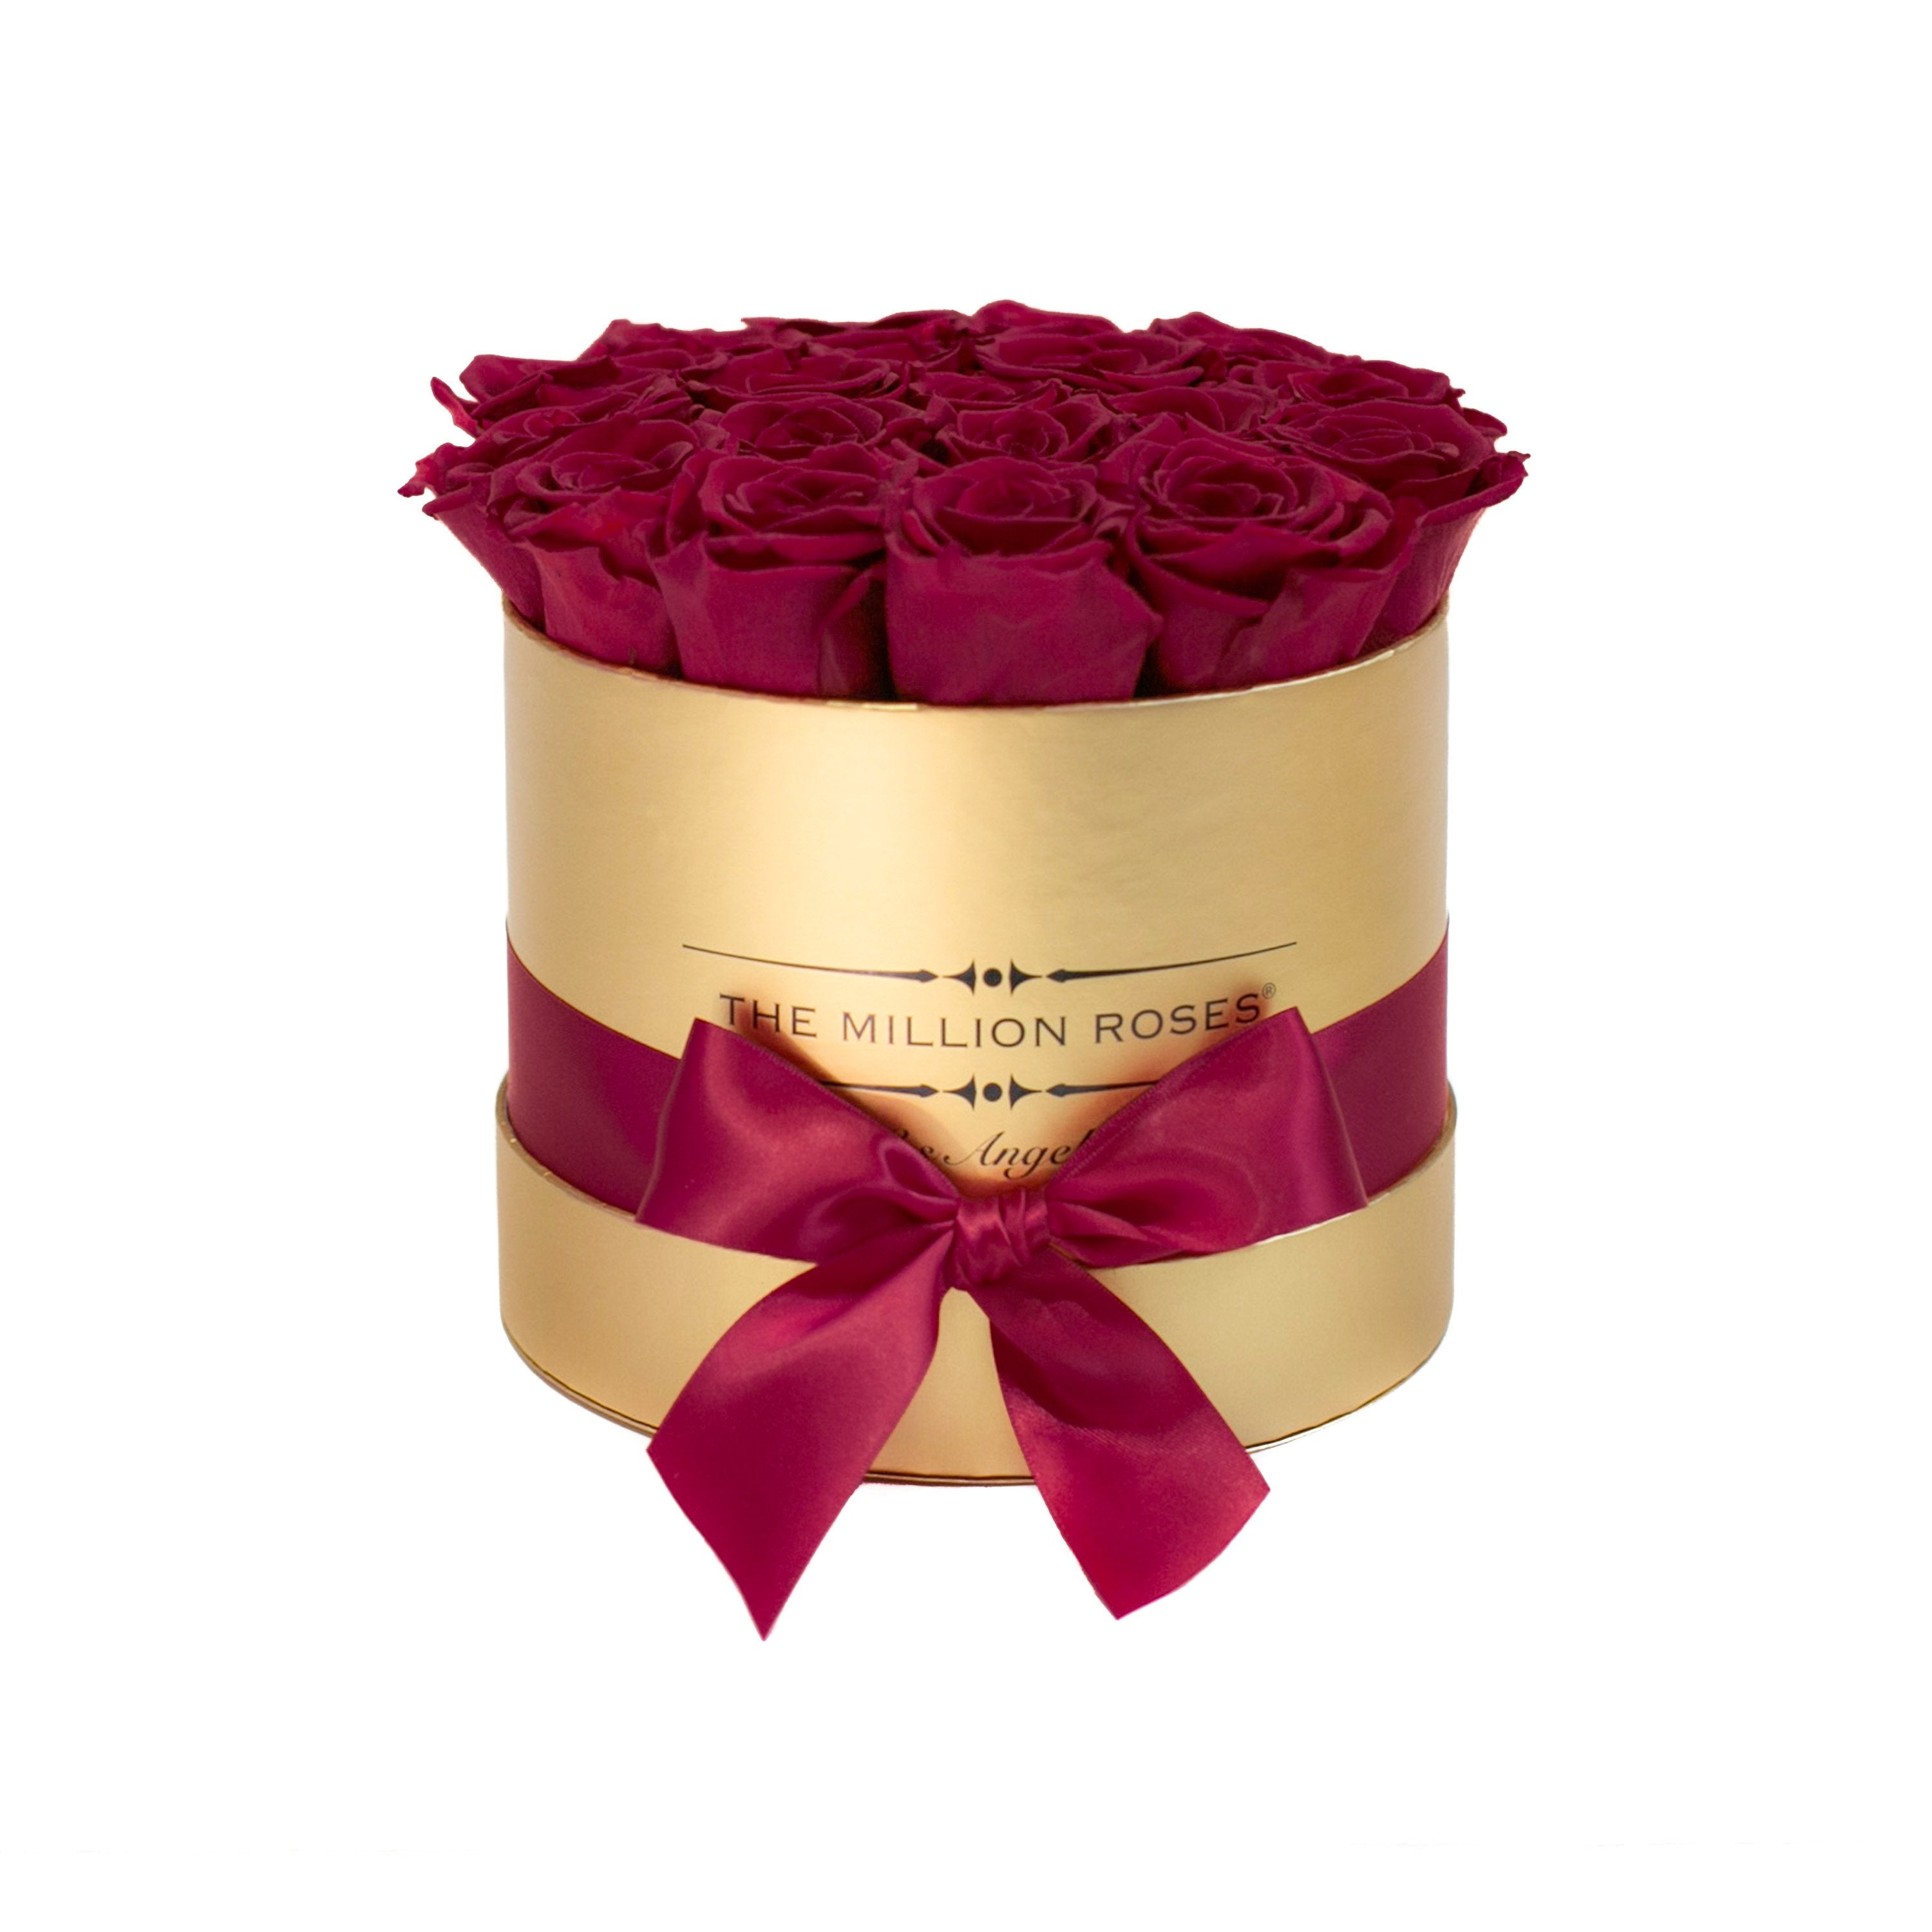 classic round box - gold - burgundy roses red eternity roses - the million roses